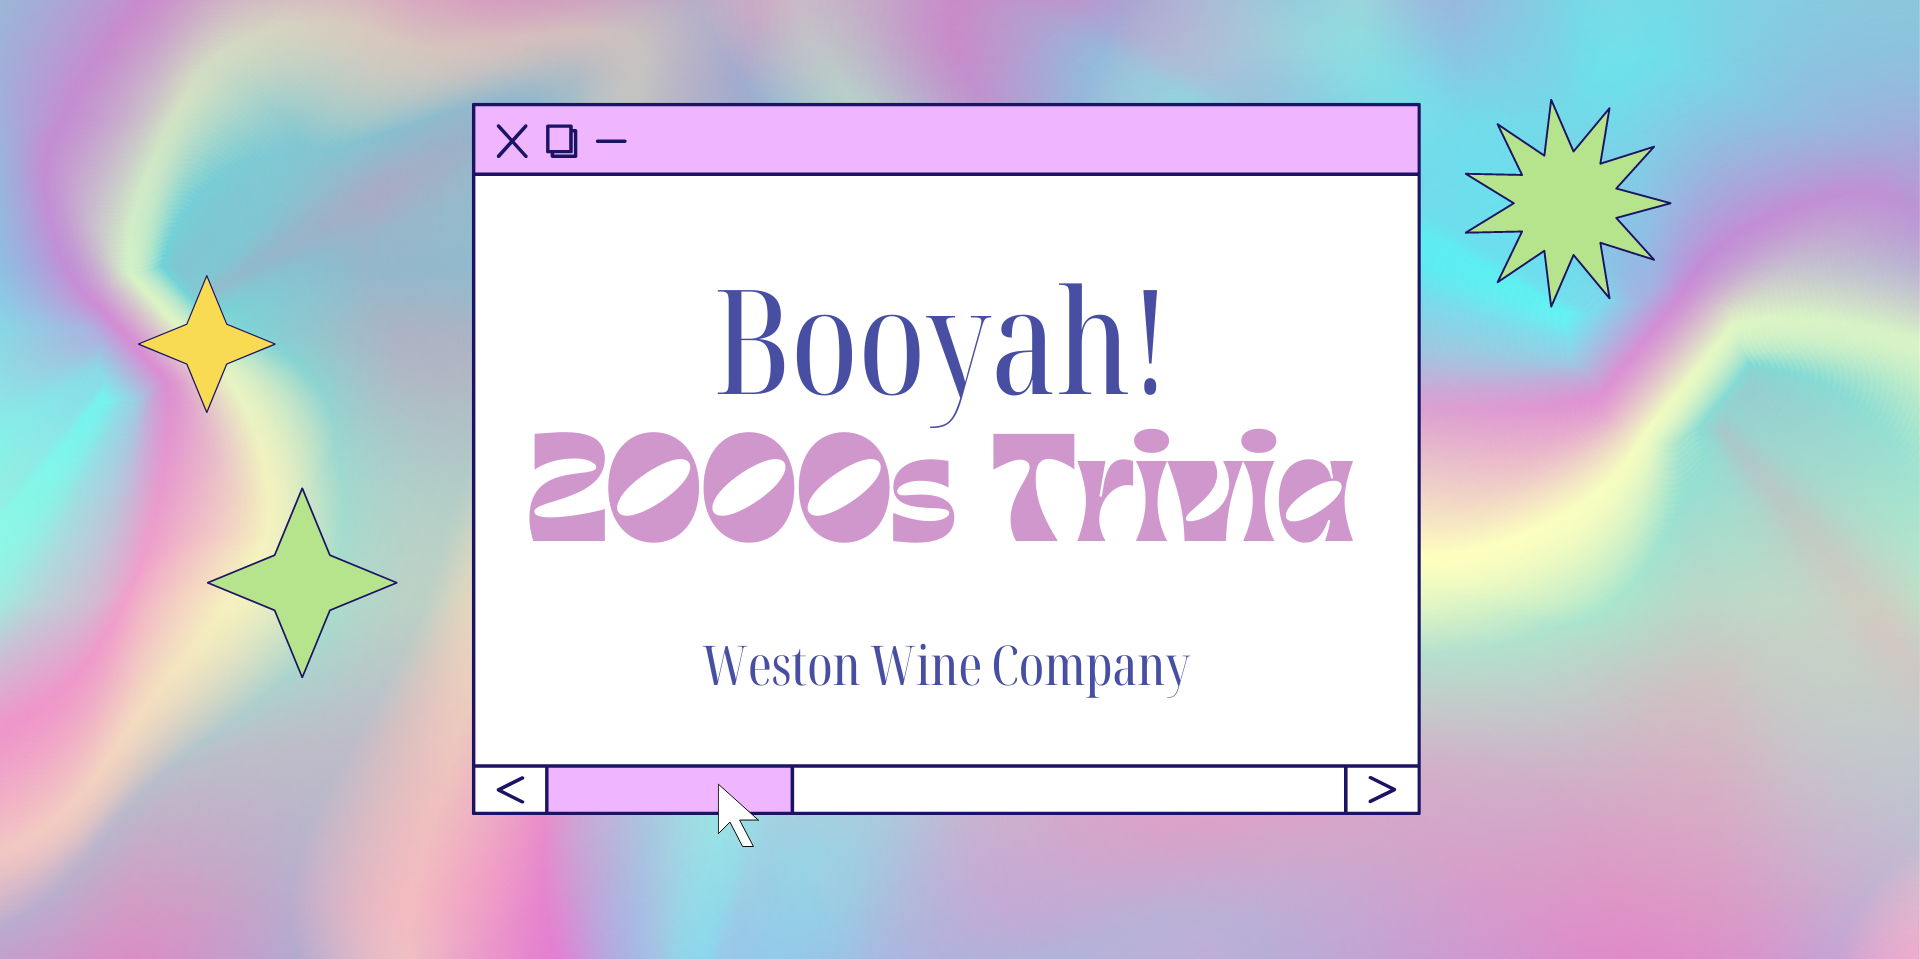 00s Trivia promotional image